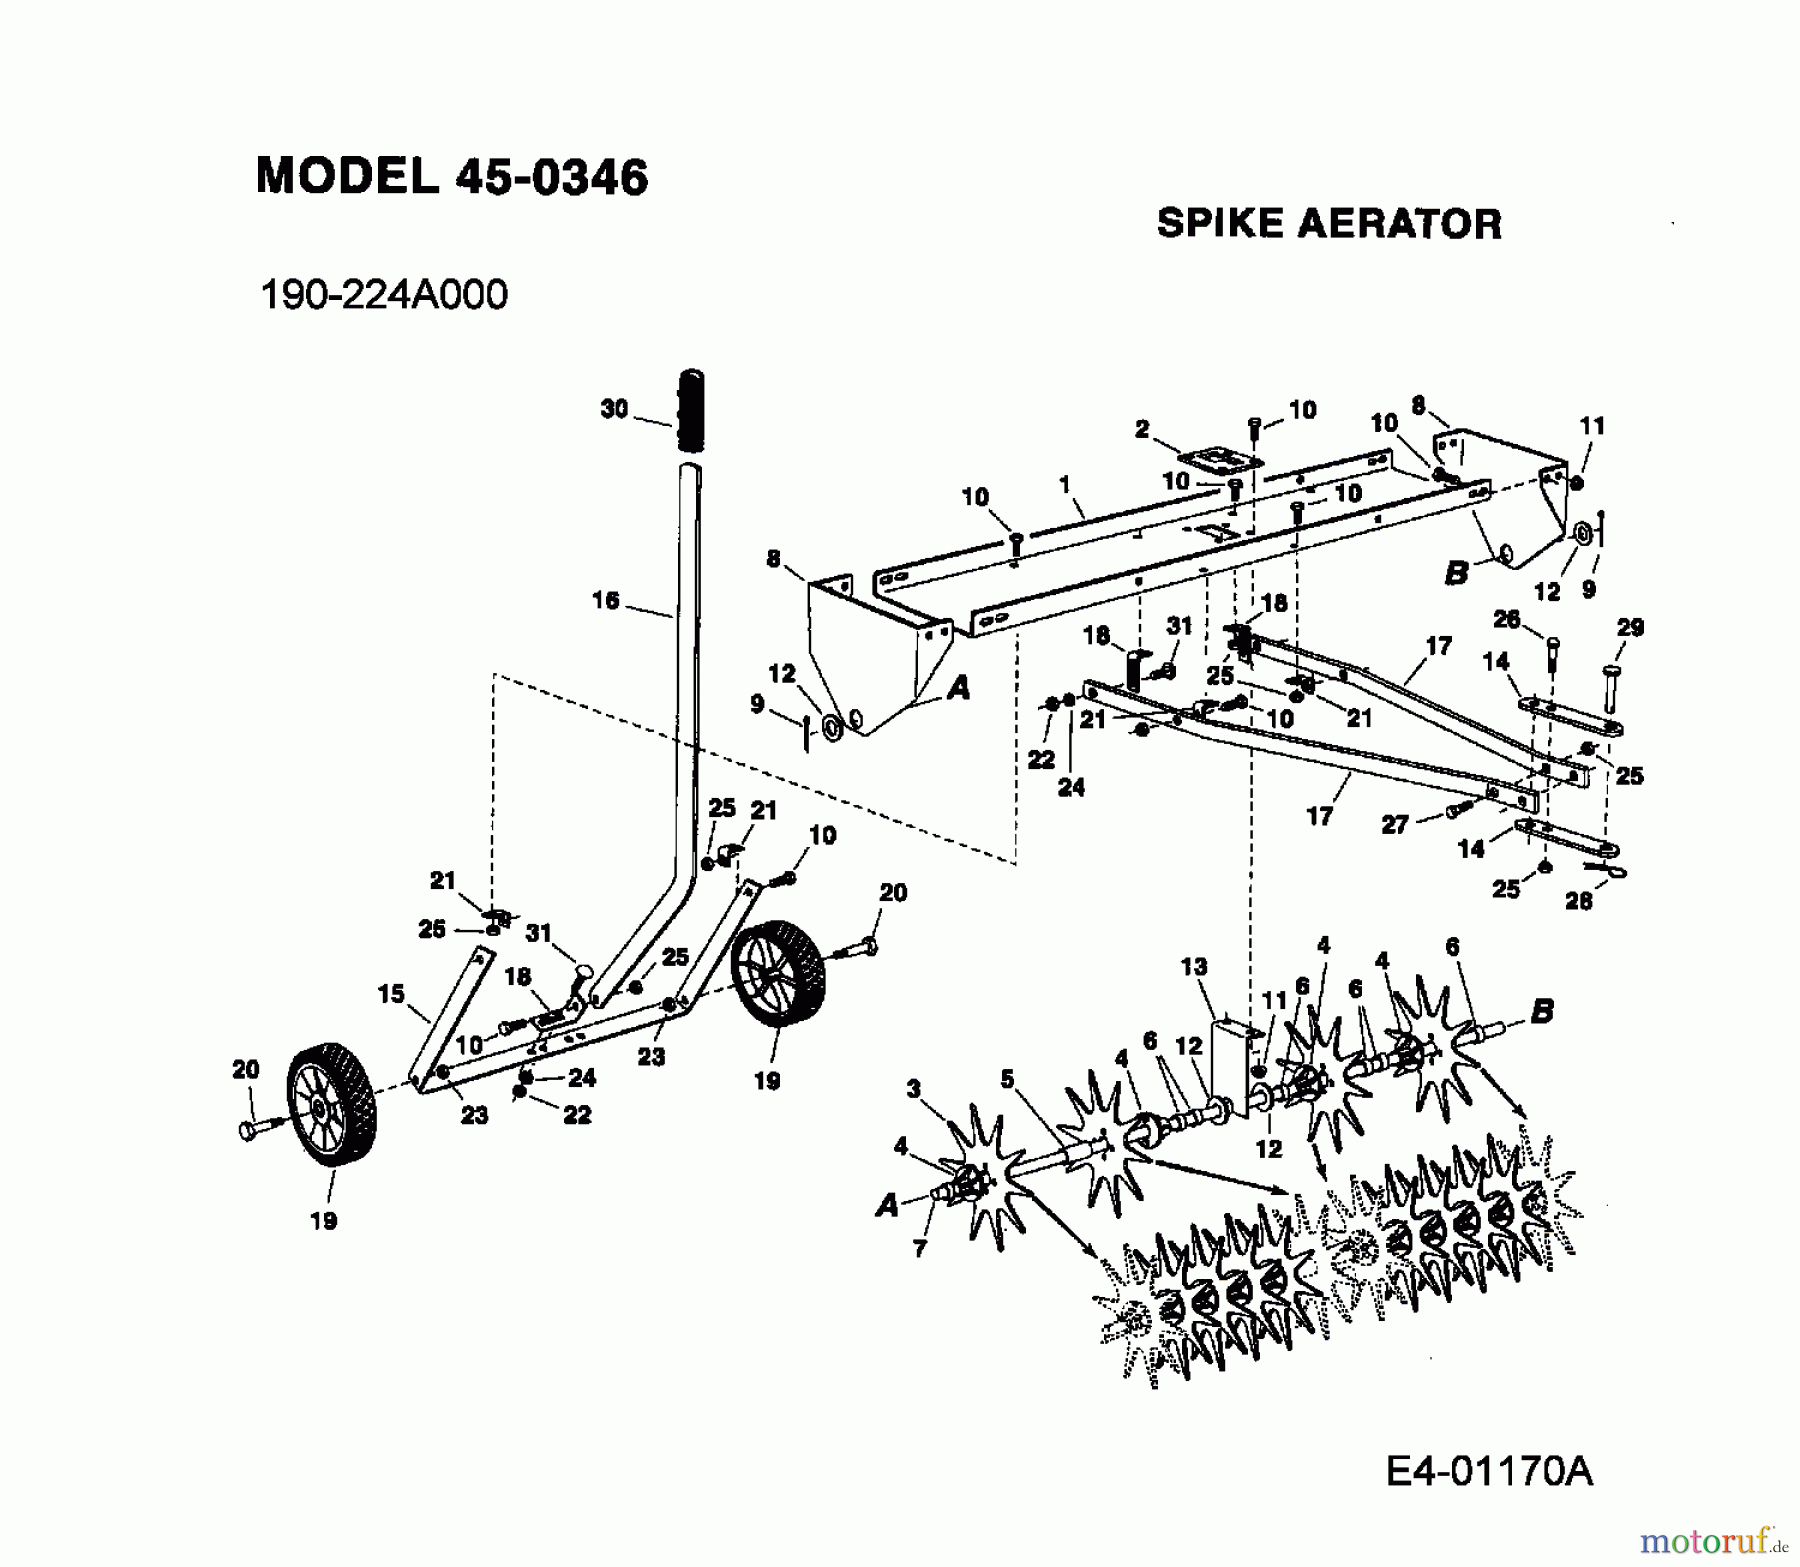  MTD Accessories Accessories garden and lawn tractors Groomer 45-0346  (190-224A000) 190-224A000  (2012) Basic machine